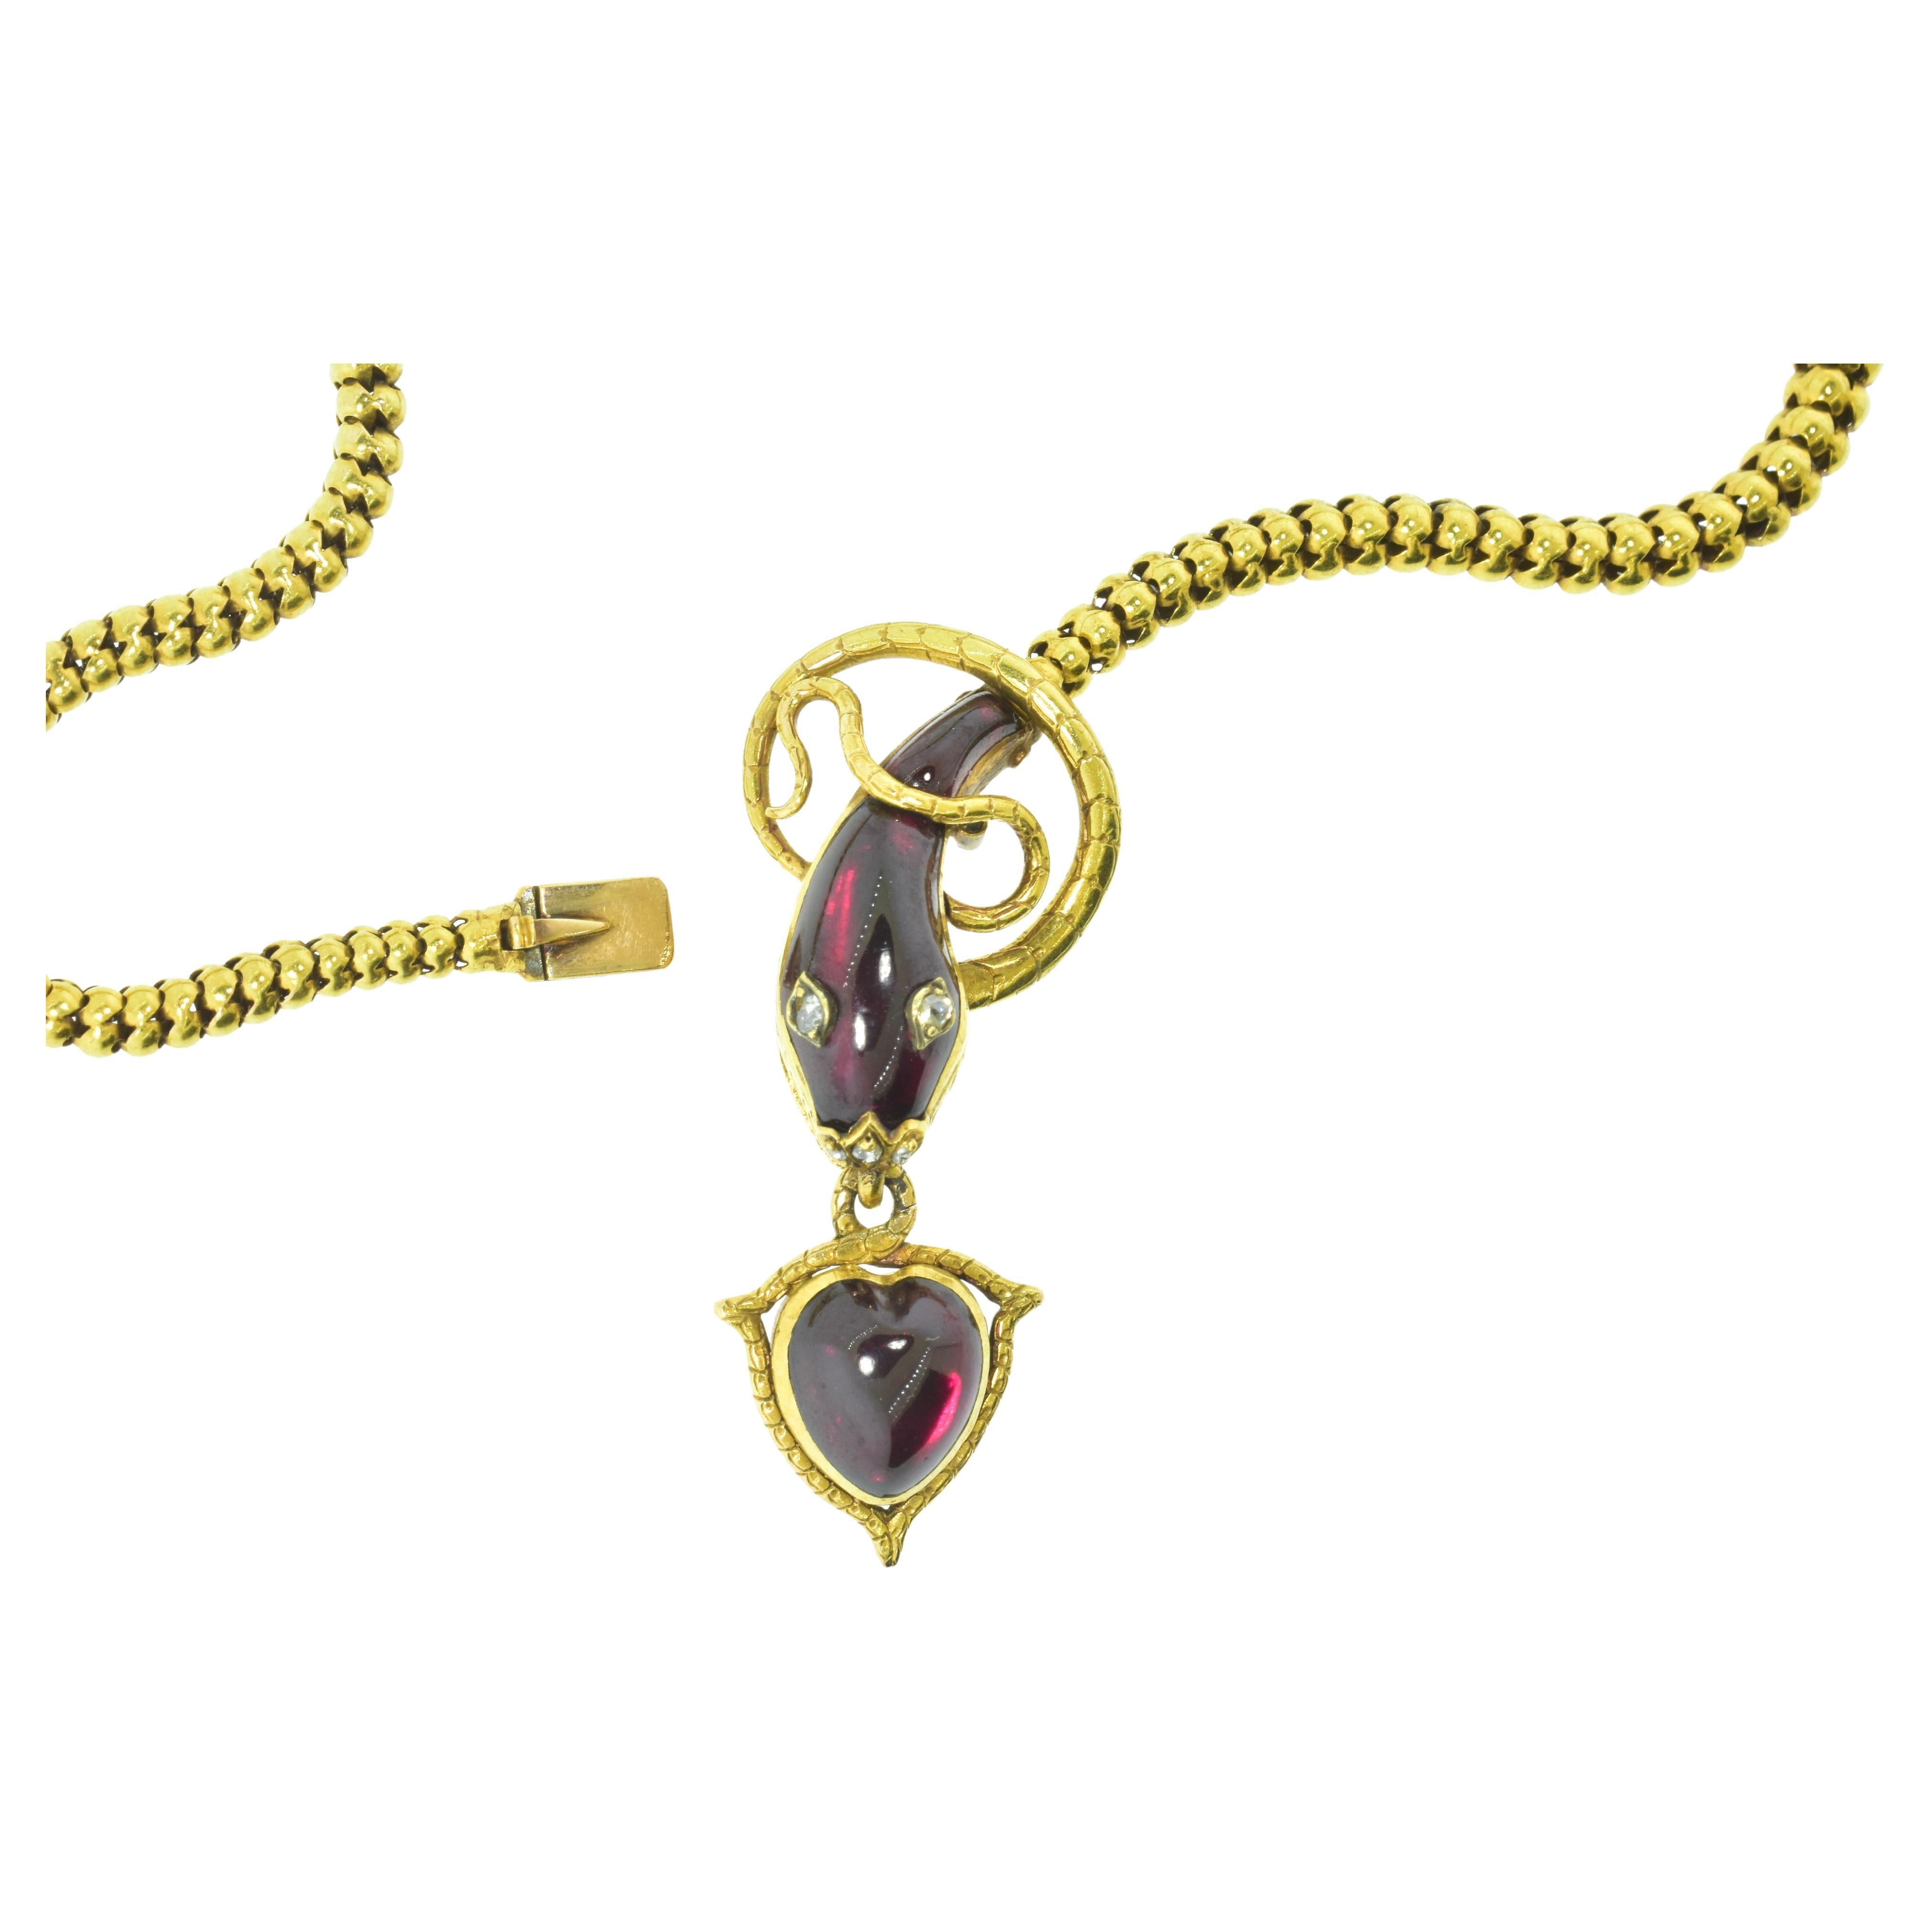 Antique Necklace hand made in 18K yellow gold with a serpent and heart motif, the heart and serpent have fancy cut red garnets and the serpent's eyes and nose are rose cut diamonds.  

This necklace is in fine condition, 16.25 inches long with the